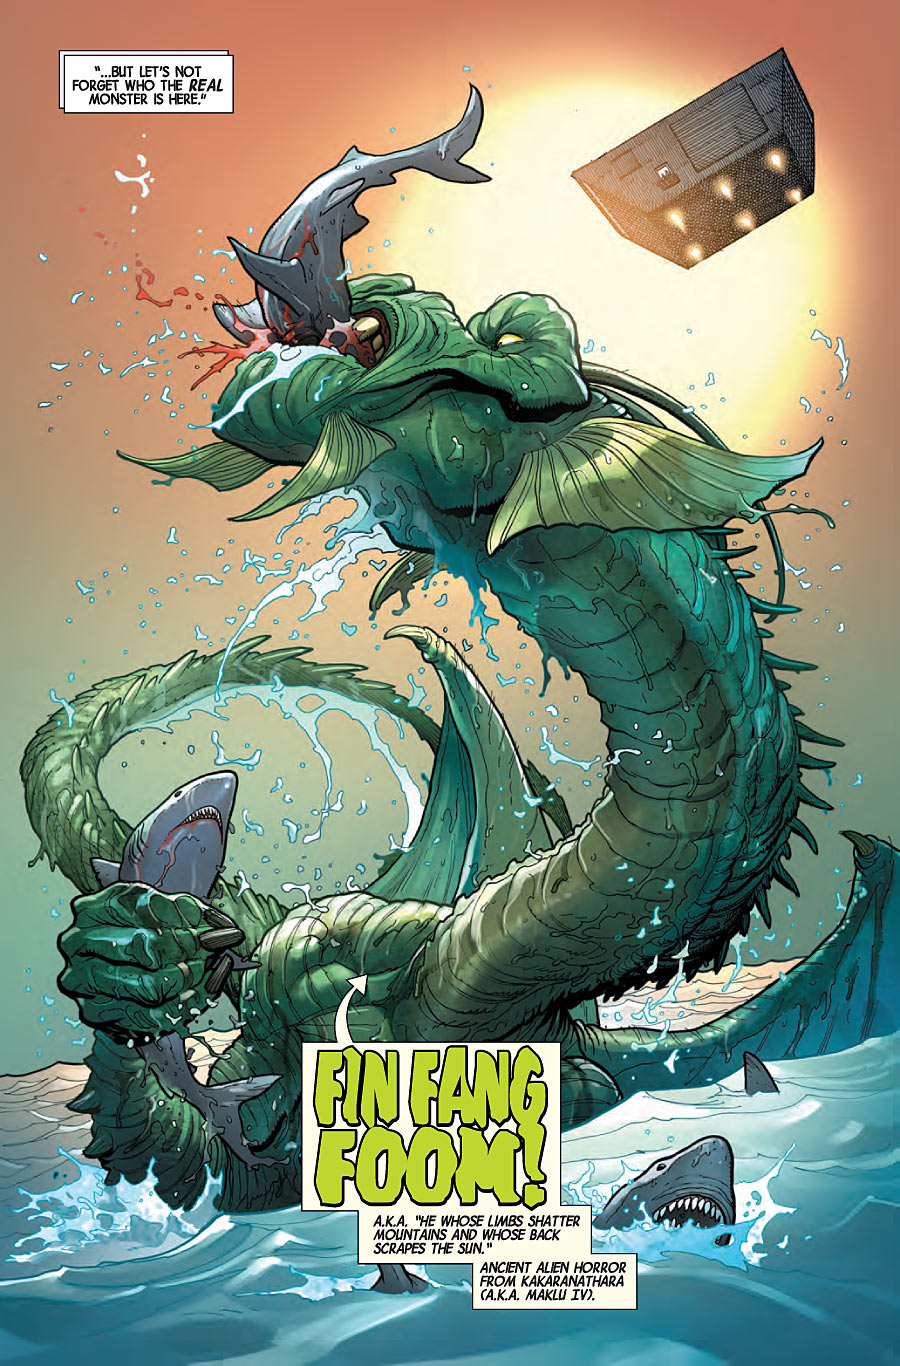 The Totally Awesome Hulk #3